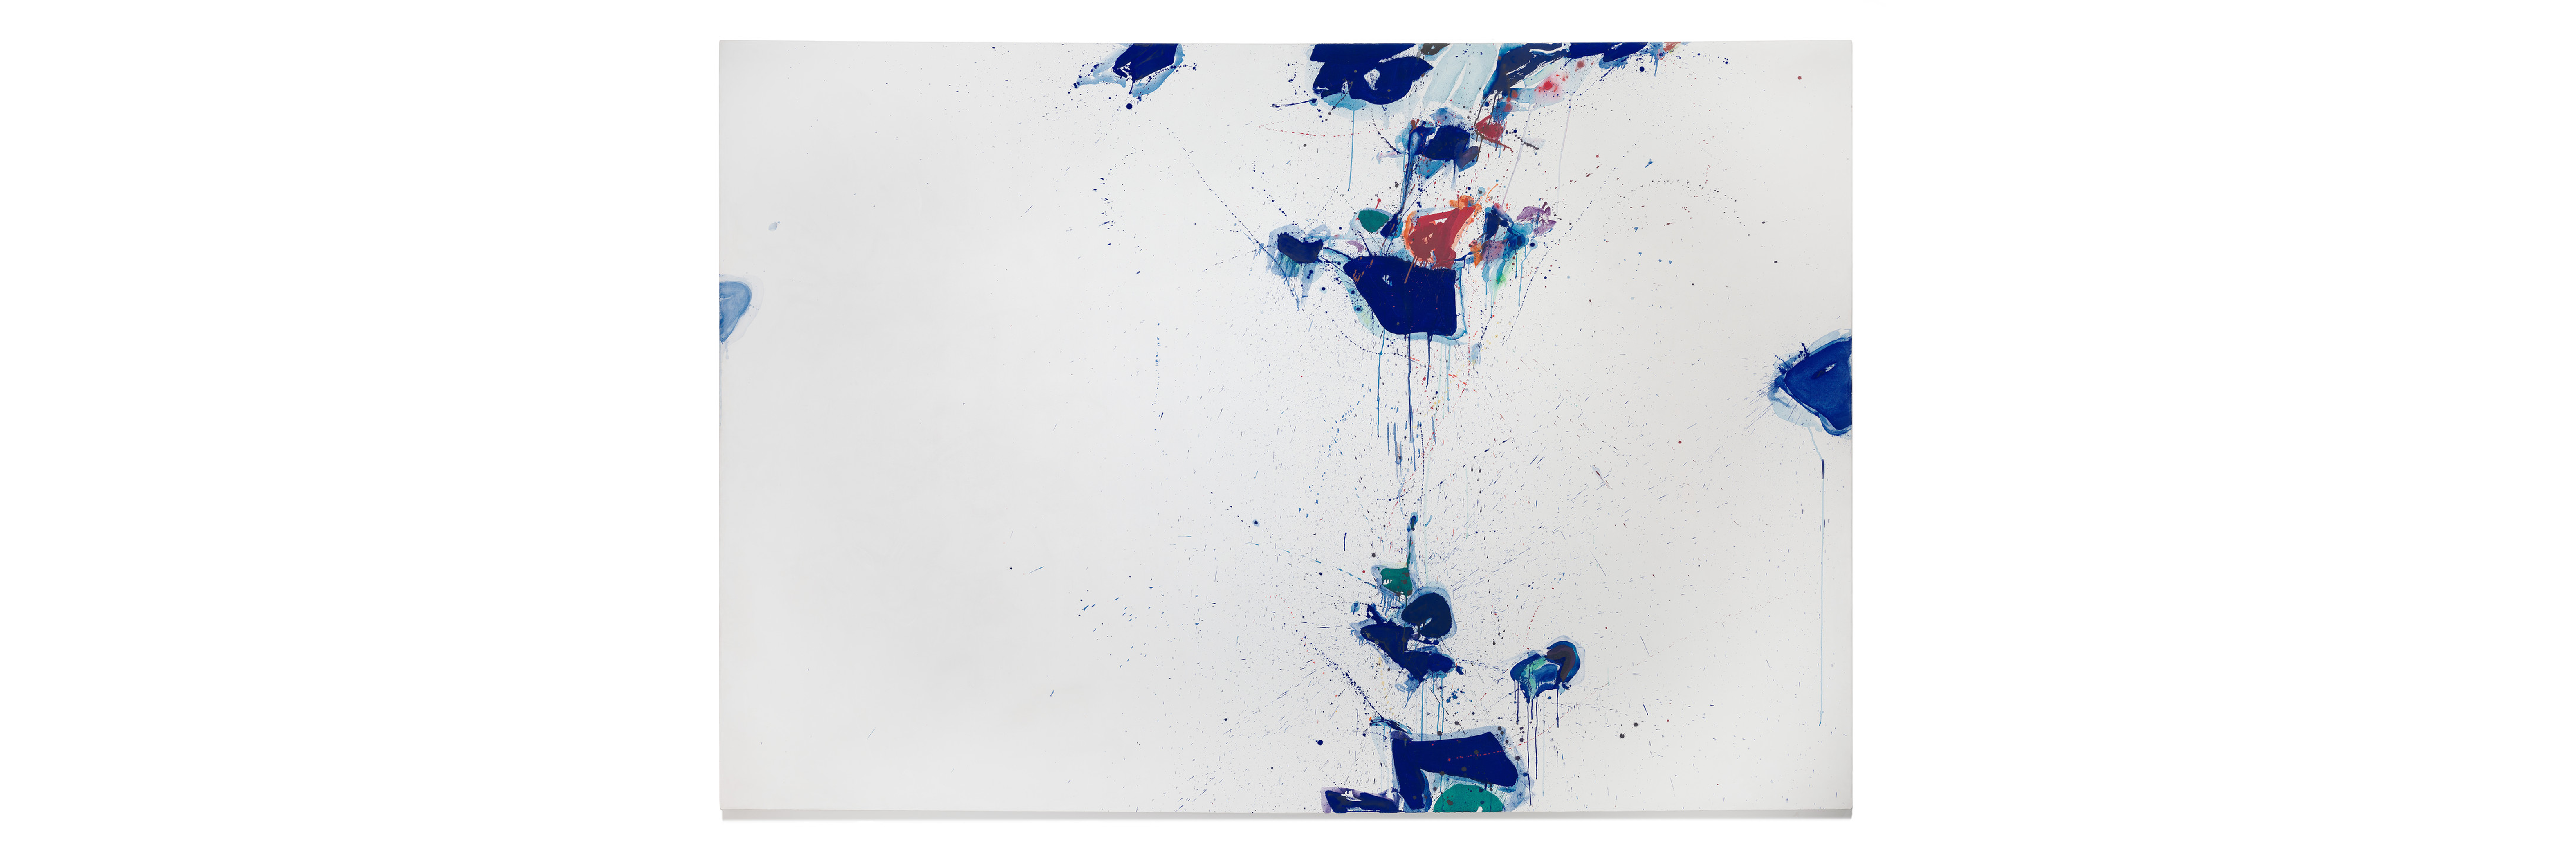 Sam Francis, Towards Disappearance, 1957-1958, Los Angeles County Museum of Art, Modern and Contemporary Art Council Fund, © Sam Francis Foundation, California/Artists Rights Society (ARS), New York, photo © Museum Associates/LACMA